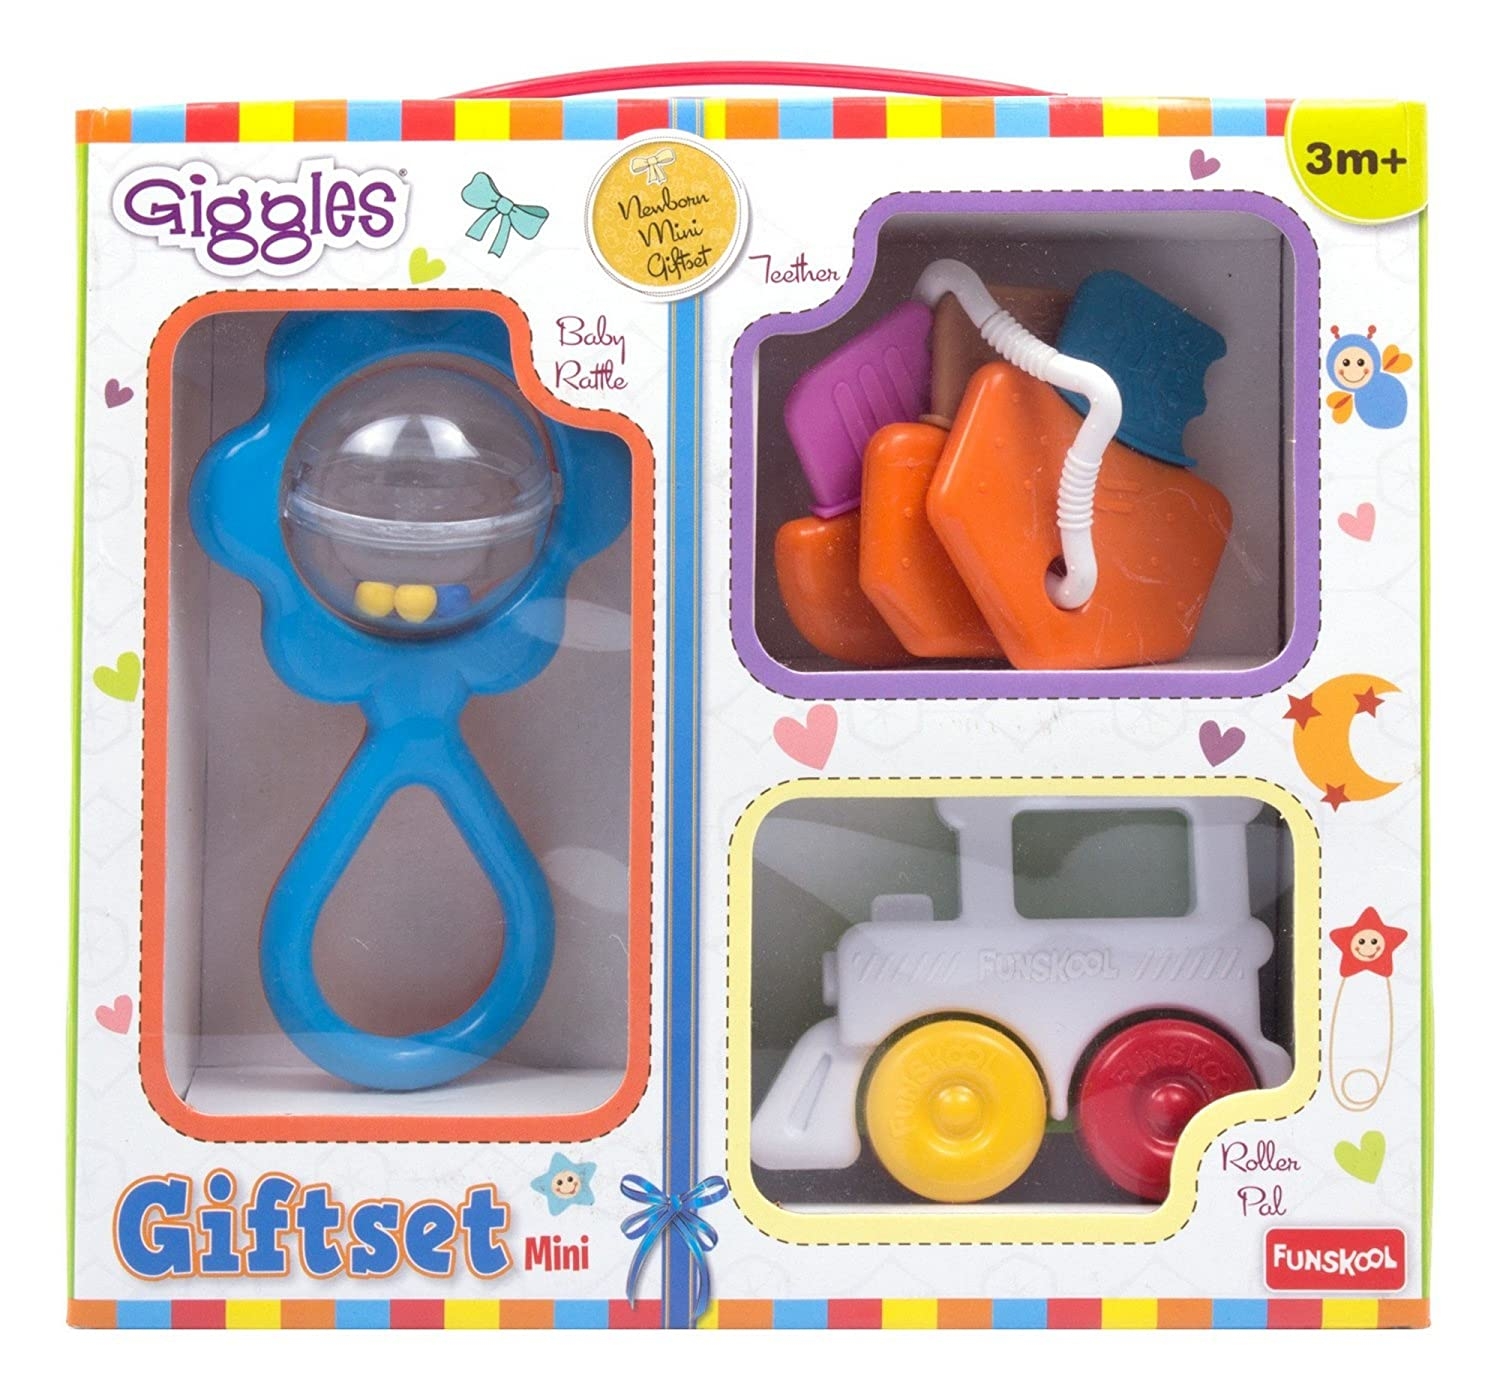 Giggles Gift Set - New Born Rattle, Teether, Vehicle